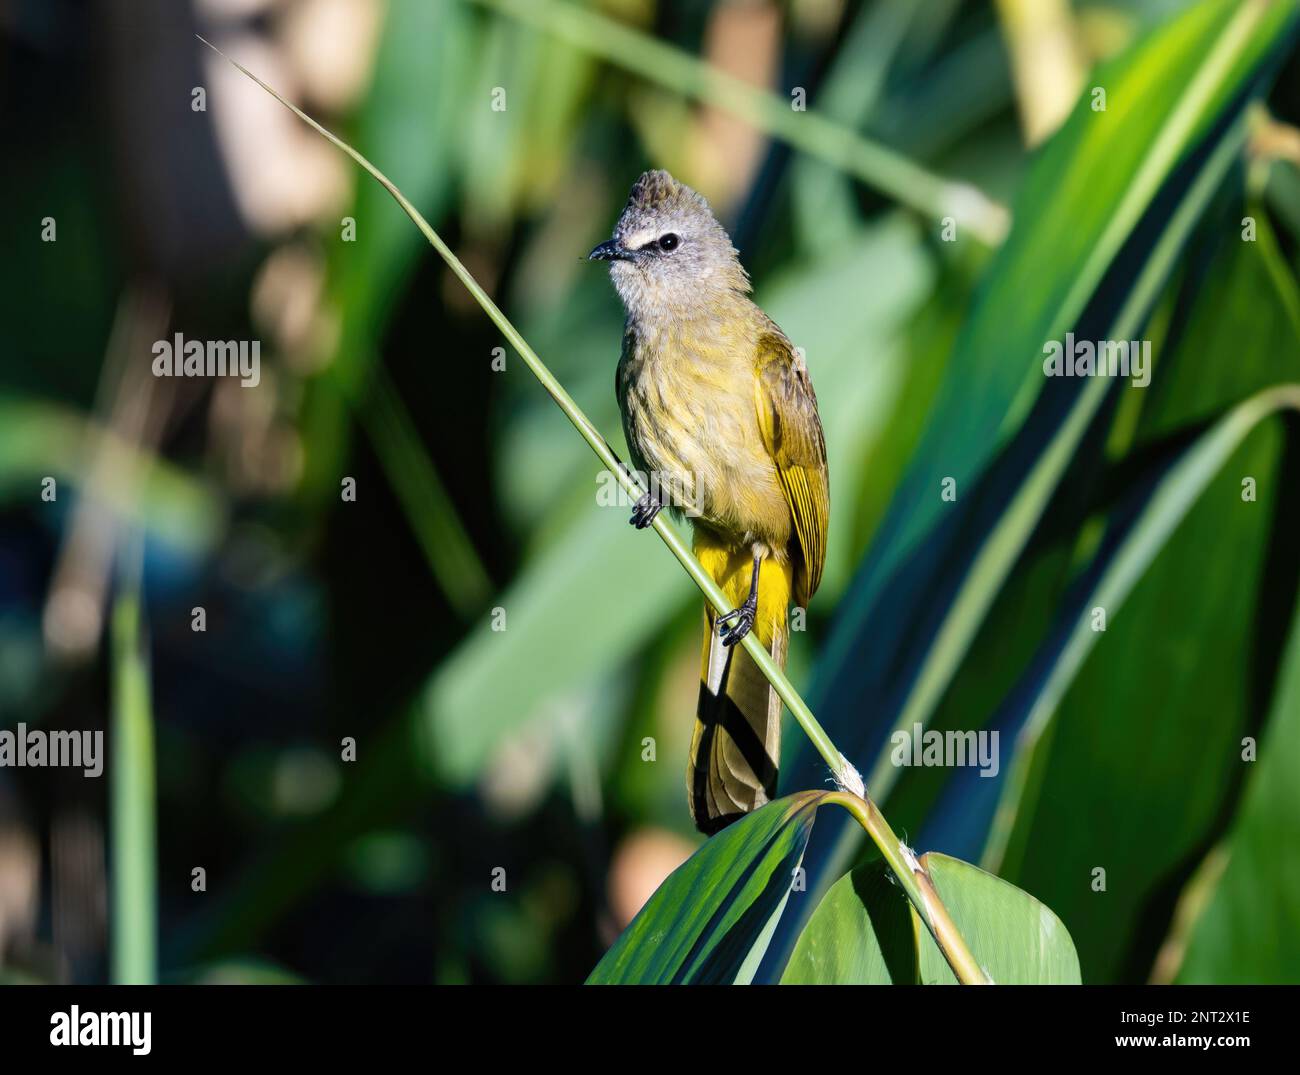 A Flavescent Bulbul (Pycnonotus flavescens) perched on a branch. Thailand. Stock Photo